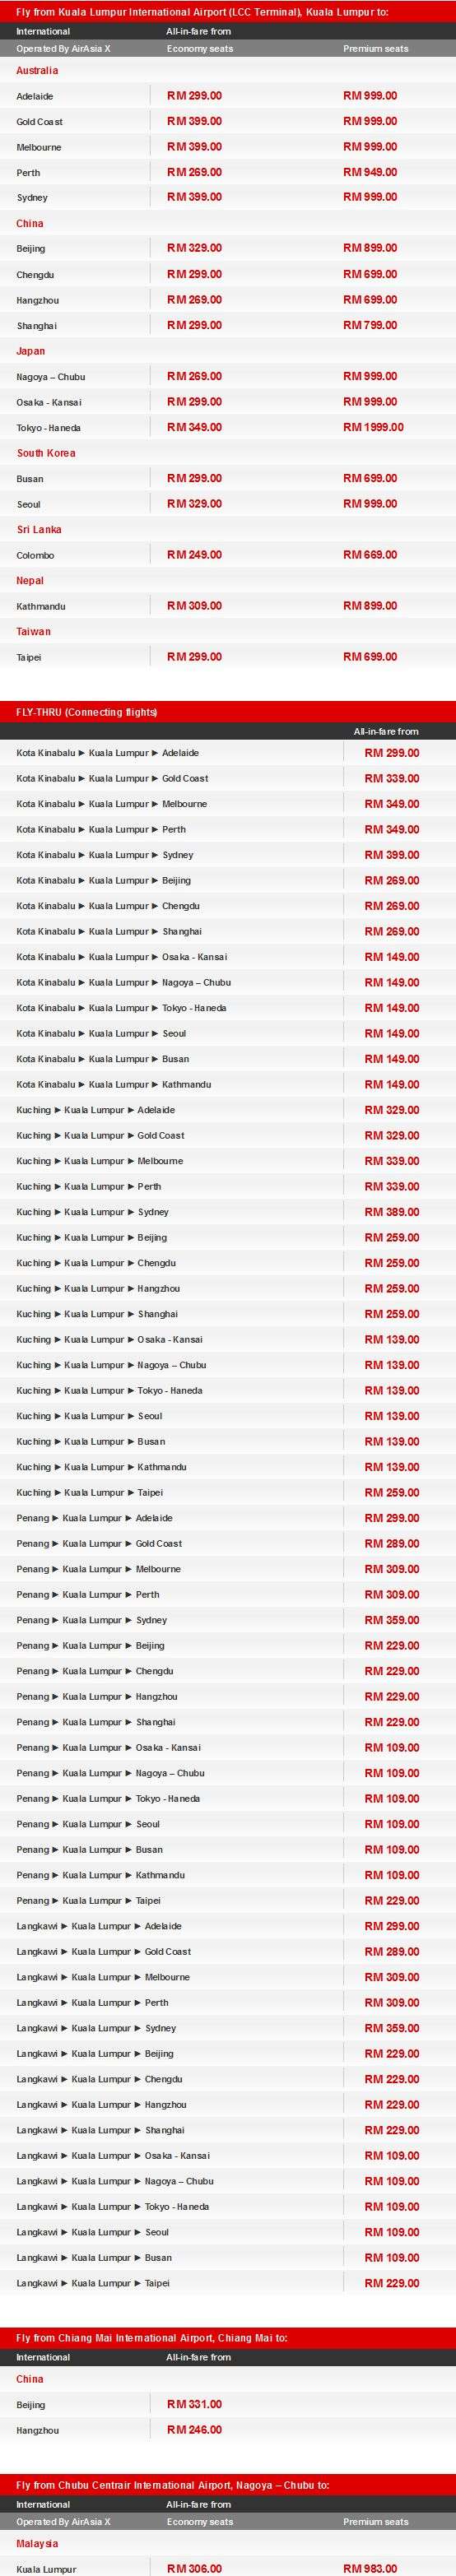 AirAsia X More Low Fare Options (Fly Later) Promotion